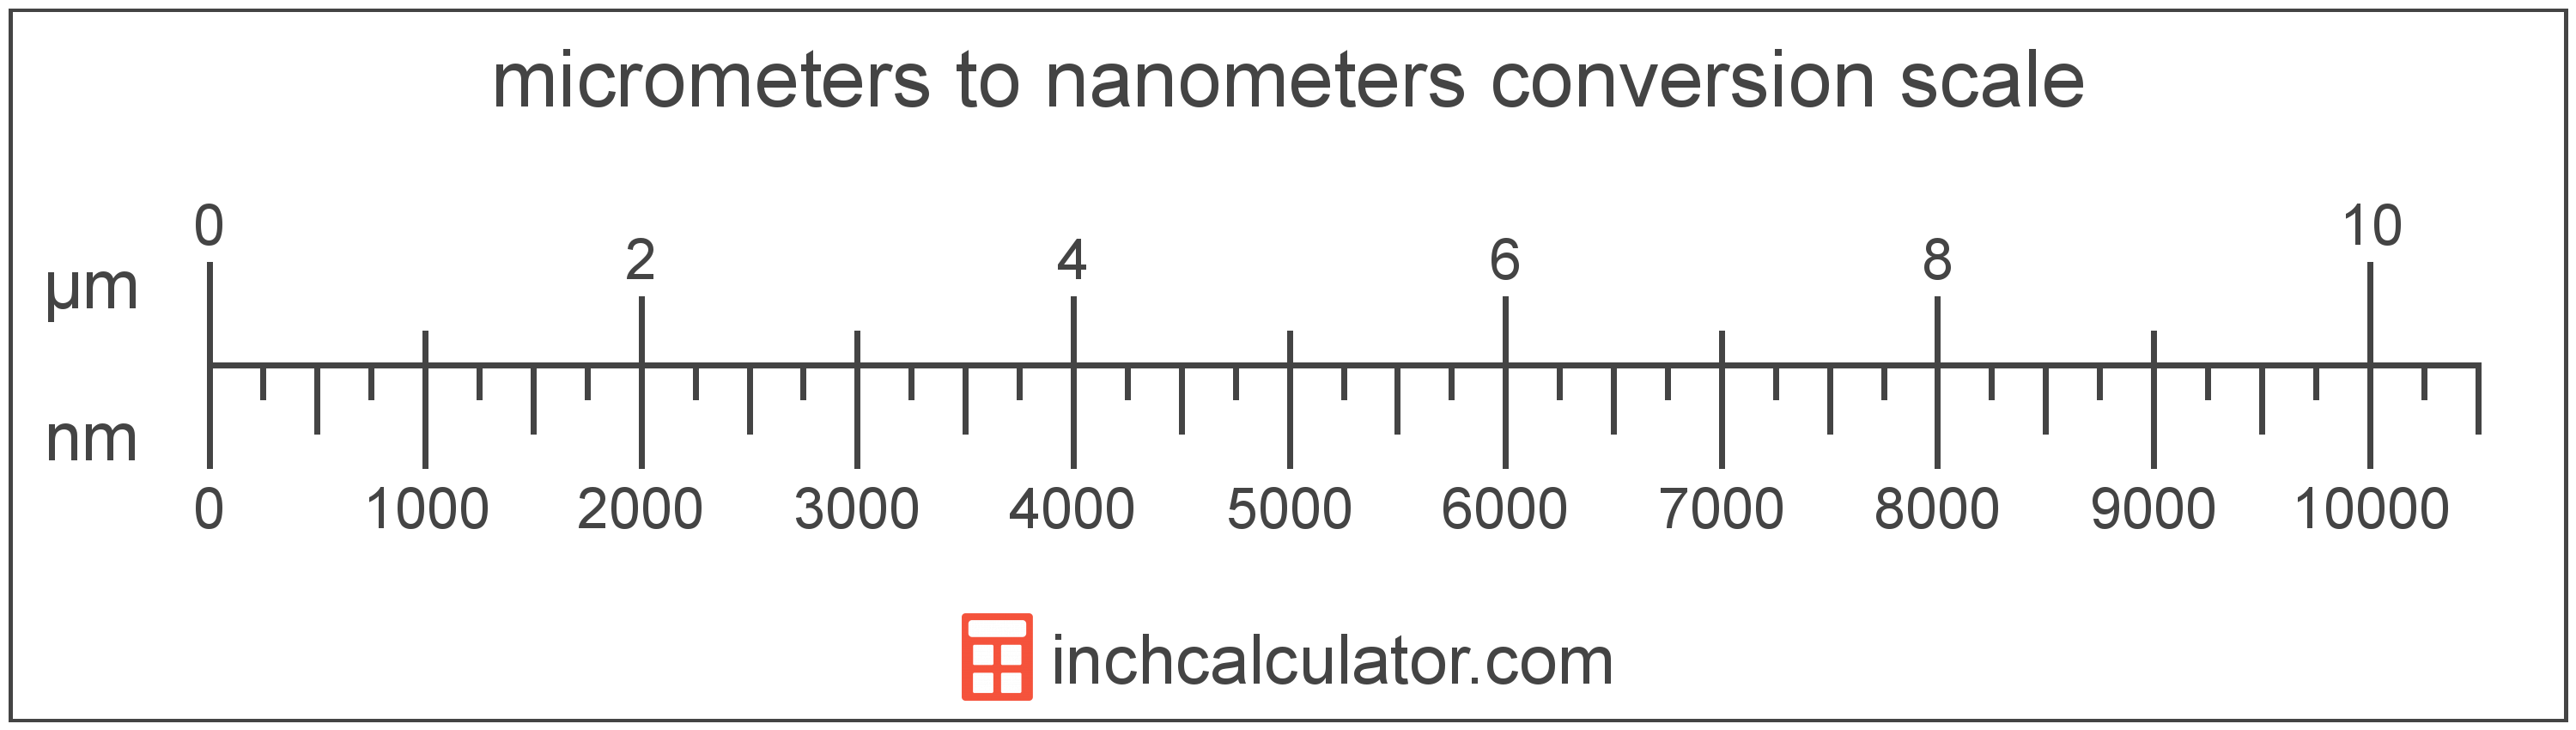 conversion scale showing nanometers and equivalent micrometers length values